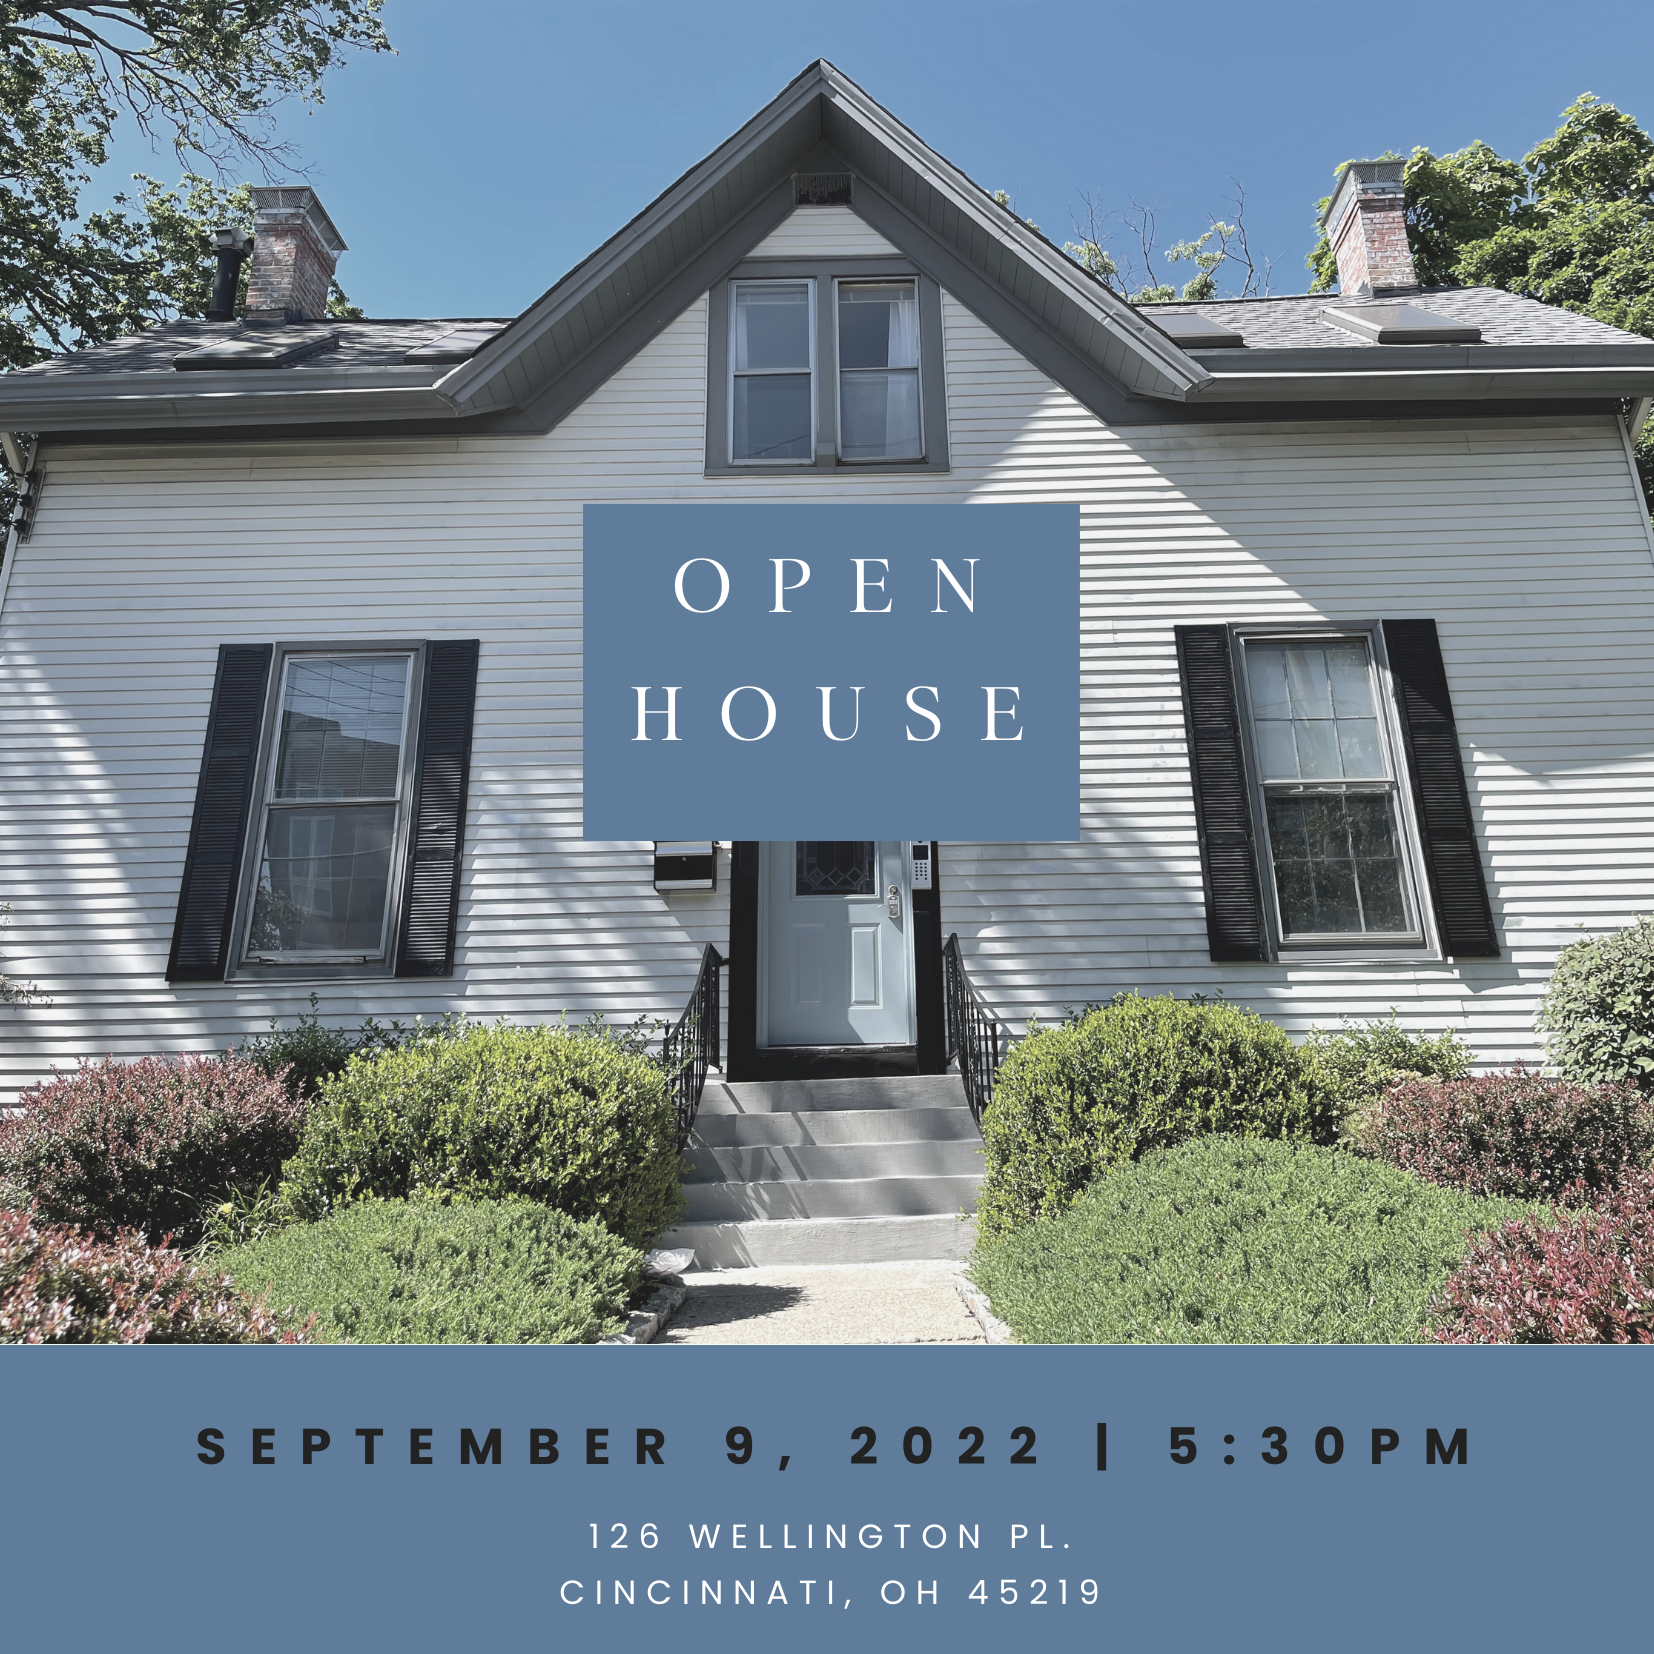 Cincinnati Center for DBT front of therapy office building, with text stating open house 9/9 5:30-7:30PM at 126 Wellington Pl, Cincinnati, OH 45219